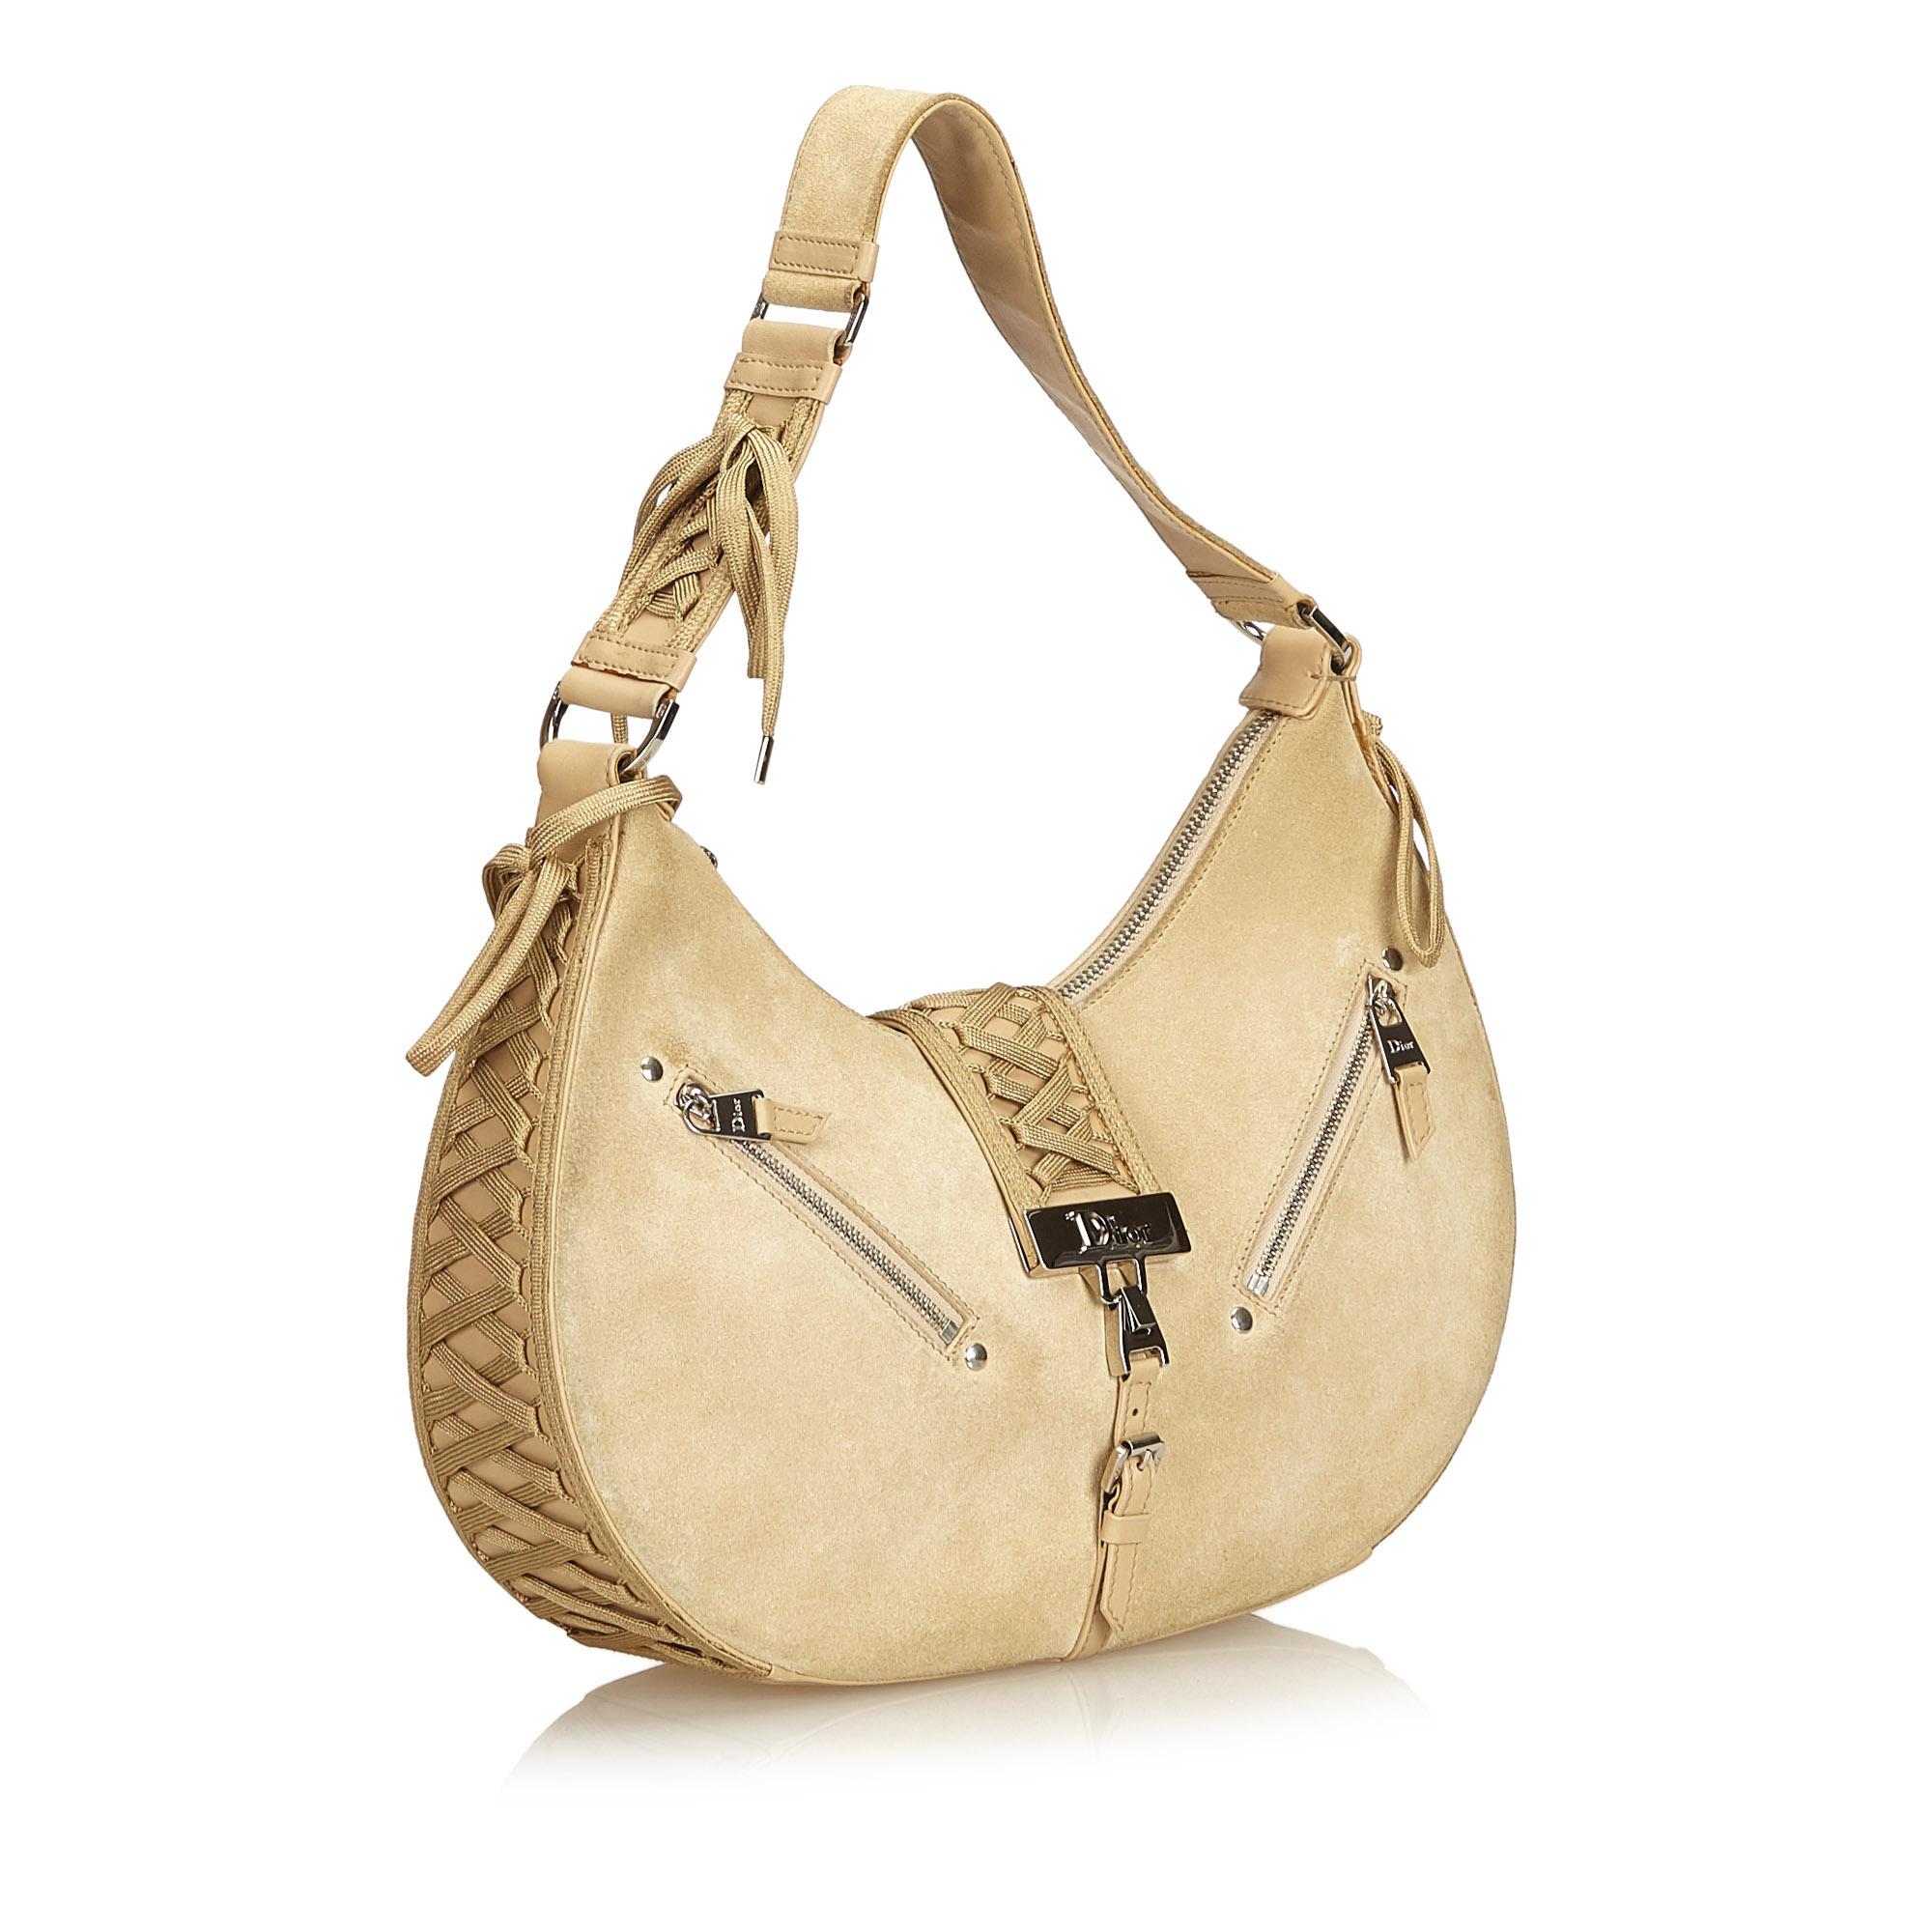 The Admit It Shoulder Bag features a canvas body, leather trim, a flat adjustable shoulder strap with a lace up detail, a front flap with a lace up detail and a magnetic closure, two exterior zip pockets, three interior open compartments, canvas